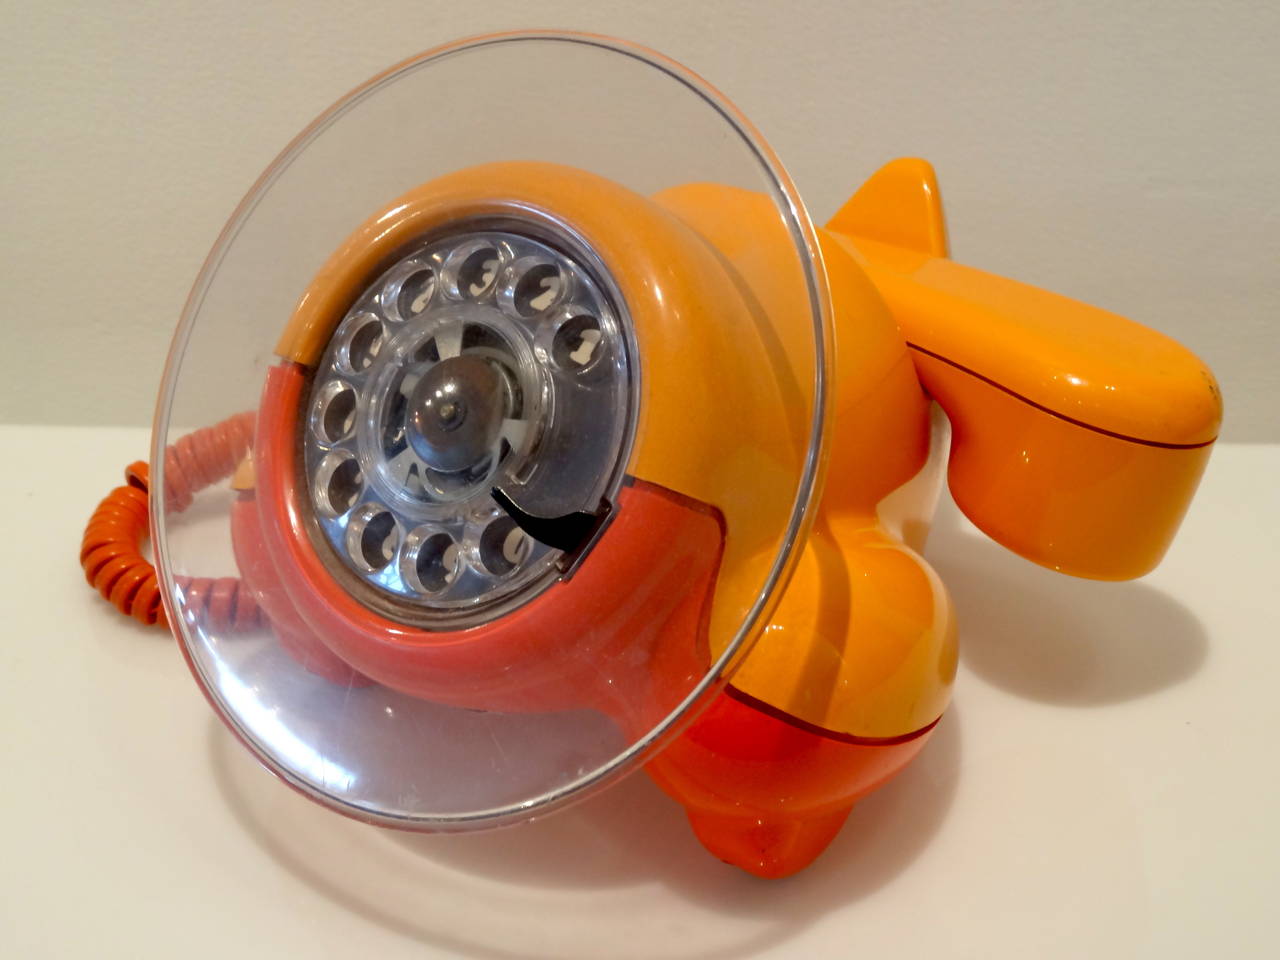 A most unusual phone of lucite in the form of an airplane.
the bright color combination compliments the whimsical nature of this piece.
A great piece of pop art .